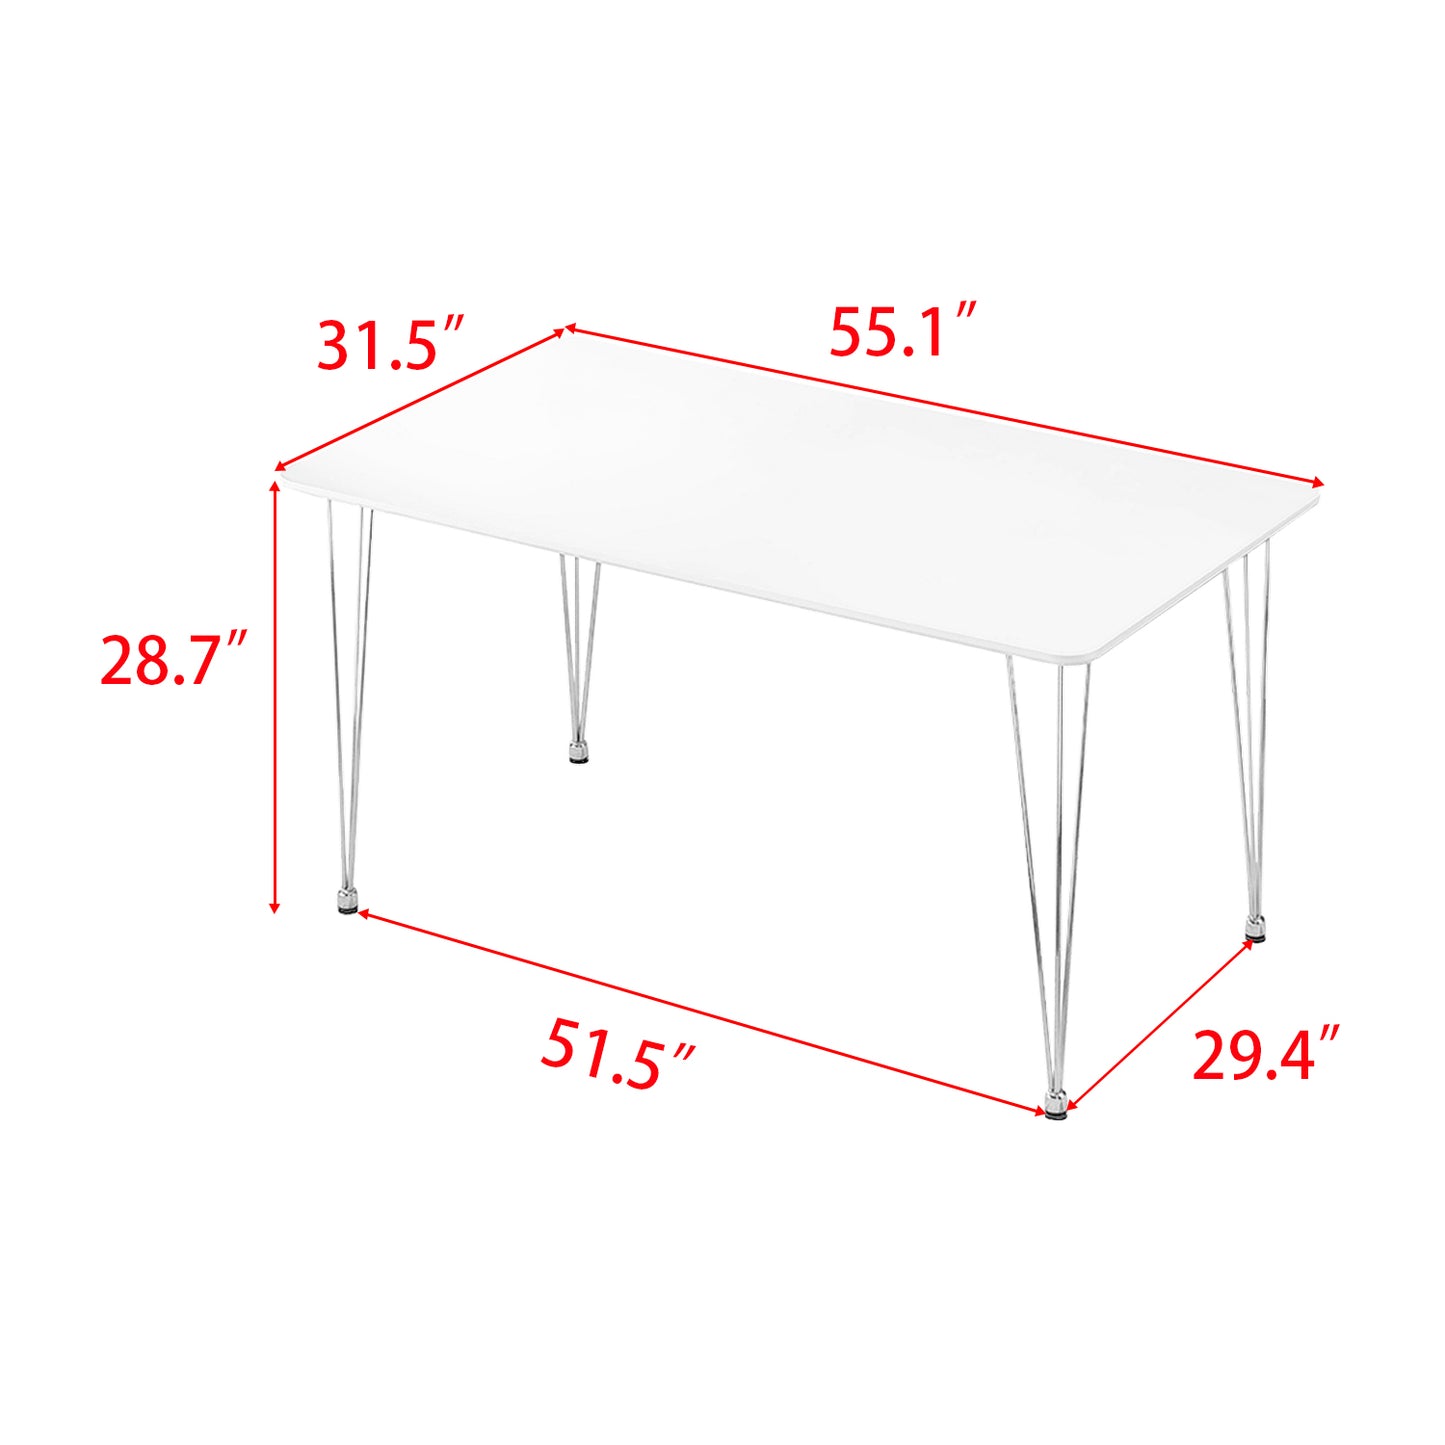 55.16&rsquo;&rsquo; Dining Room Table Rectangle Modern Home Kitchen Table With Wood Tabletop Chrome Legs Office Study Desk